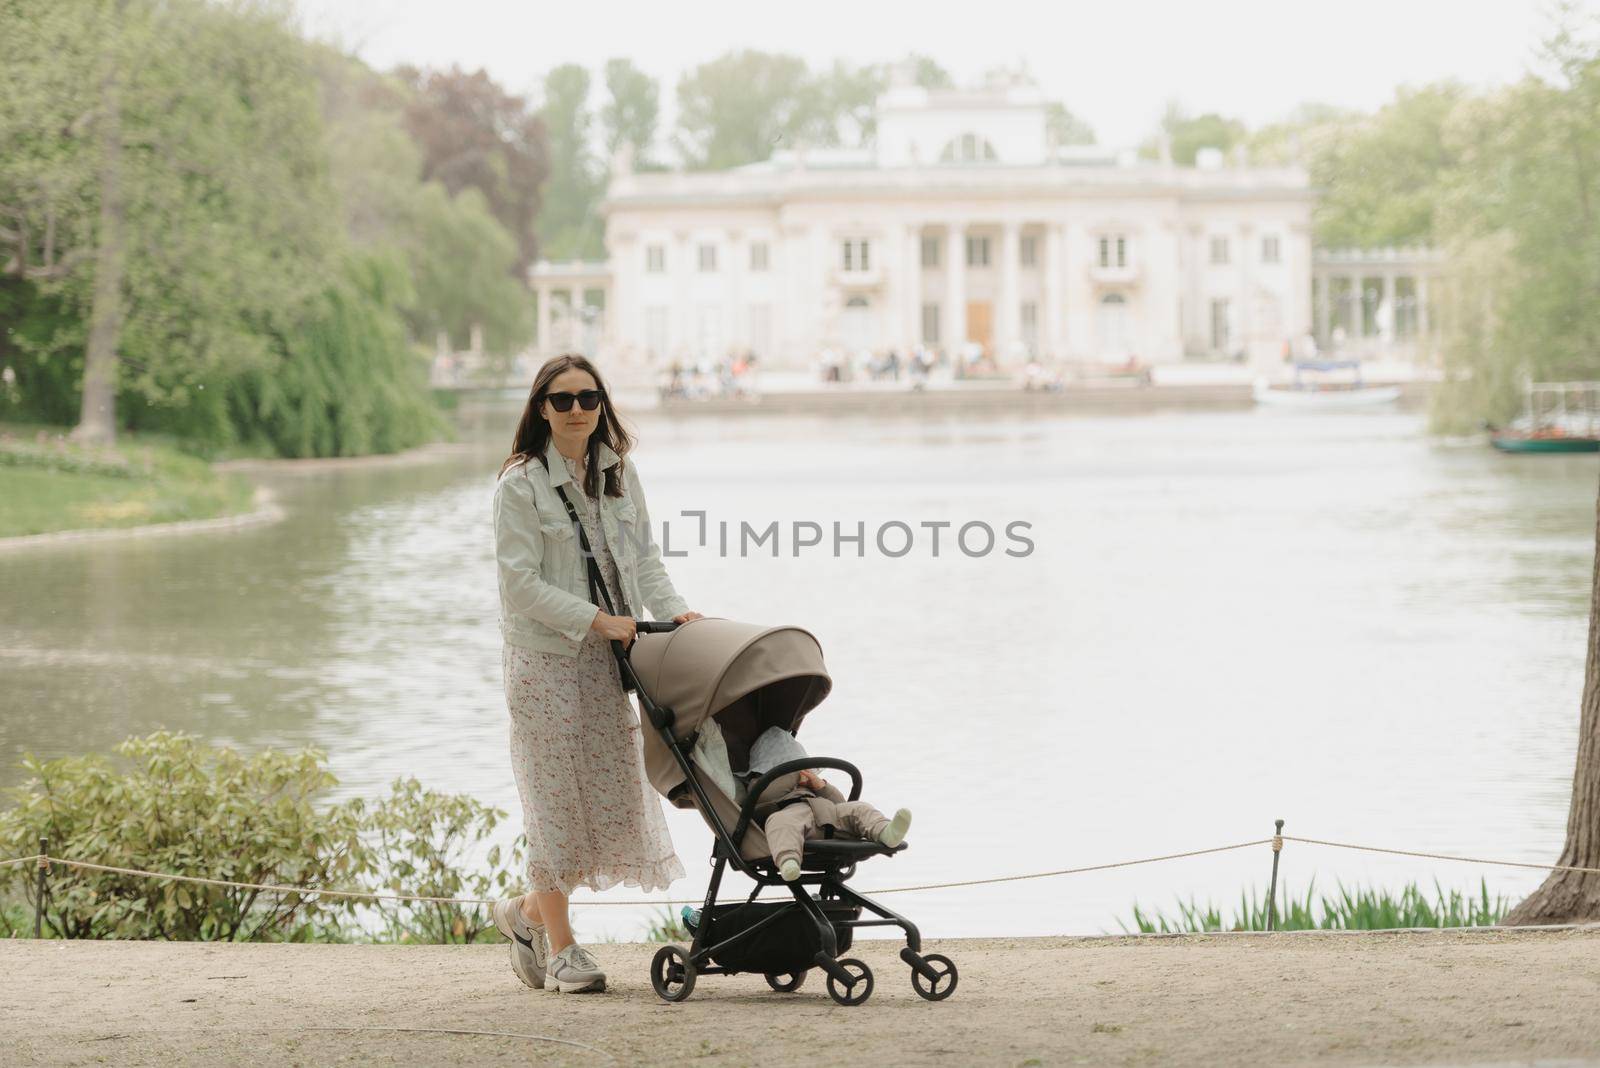 A mother in full growth is posing with her baby in the stroller on the territory of the palace. A mom with a baby in the carriage with classical architecture in the background in the park.